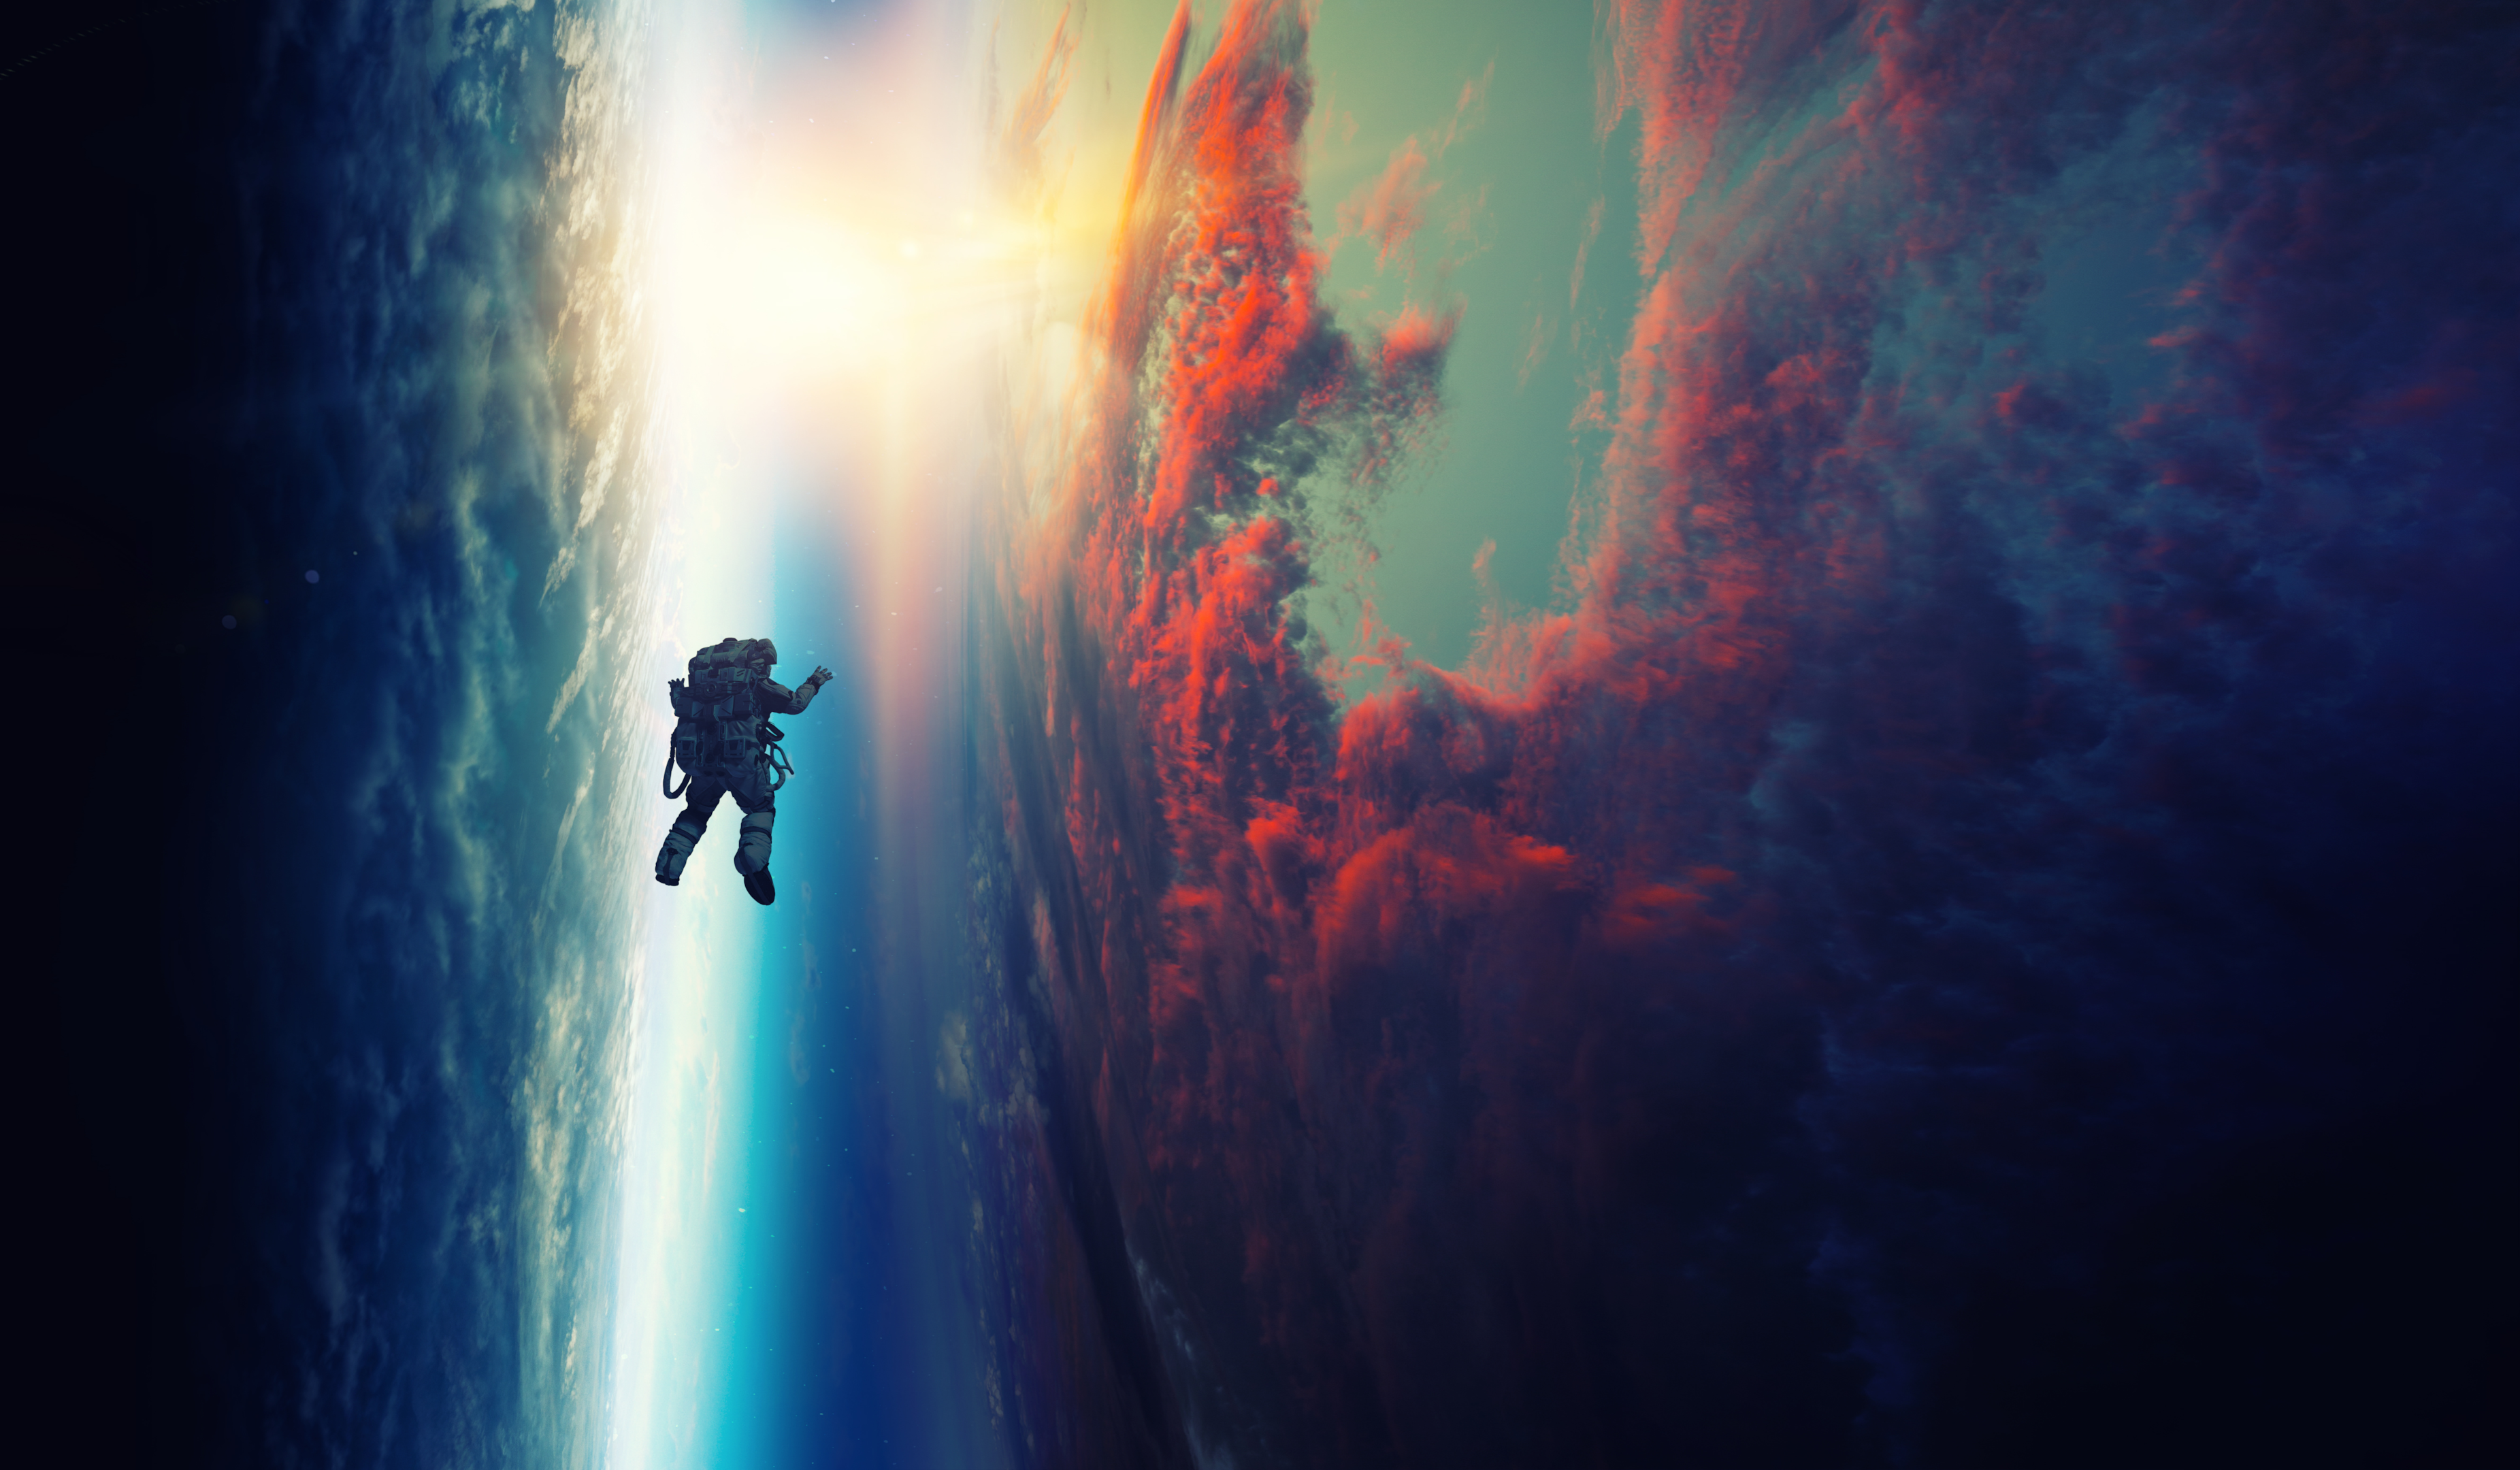 Interstellar has the potential to give you a sense of euphoria and relaxation.